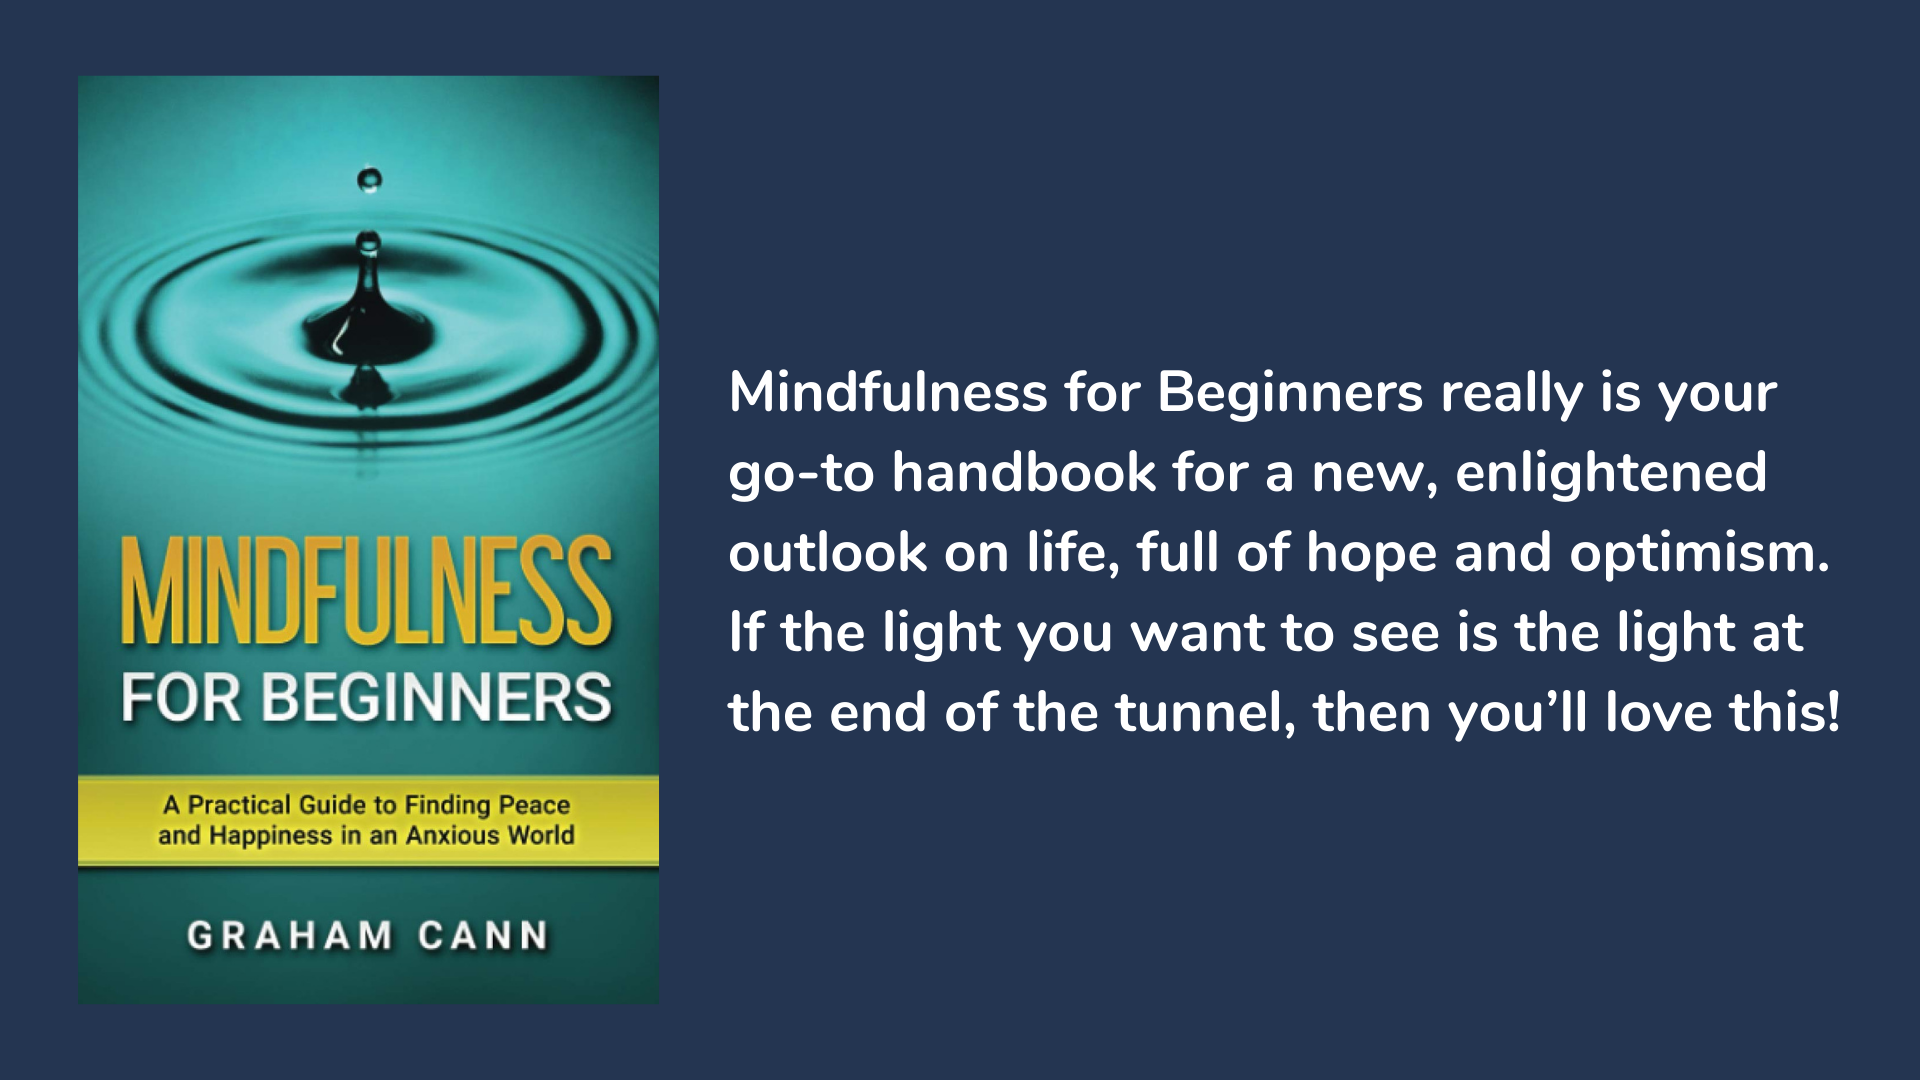 Mindfulness for Beginners: A Practical Guide to Finding Peace and Happiness in an Anxious World, book cover and description.